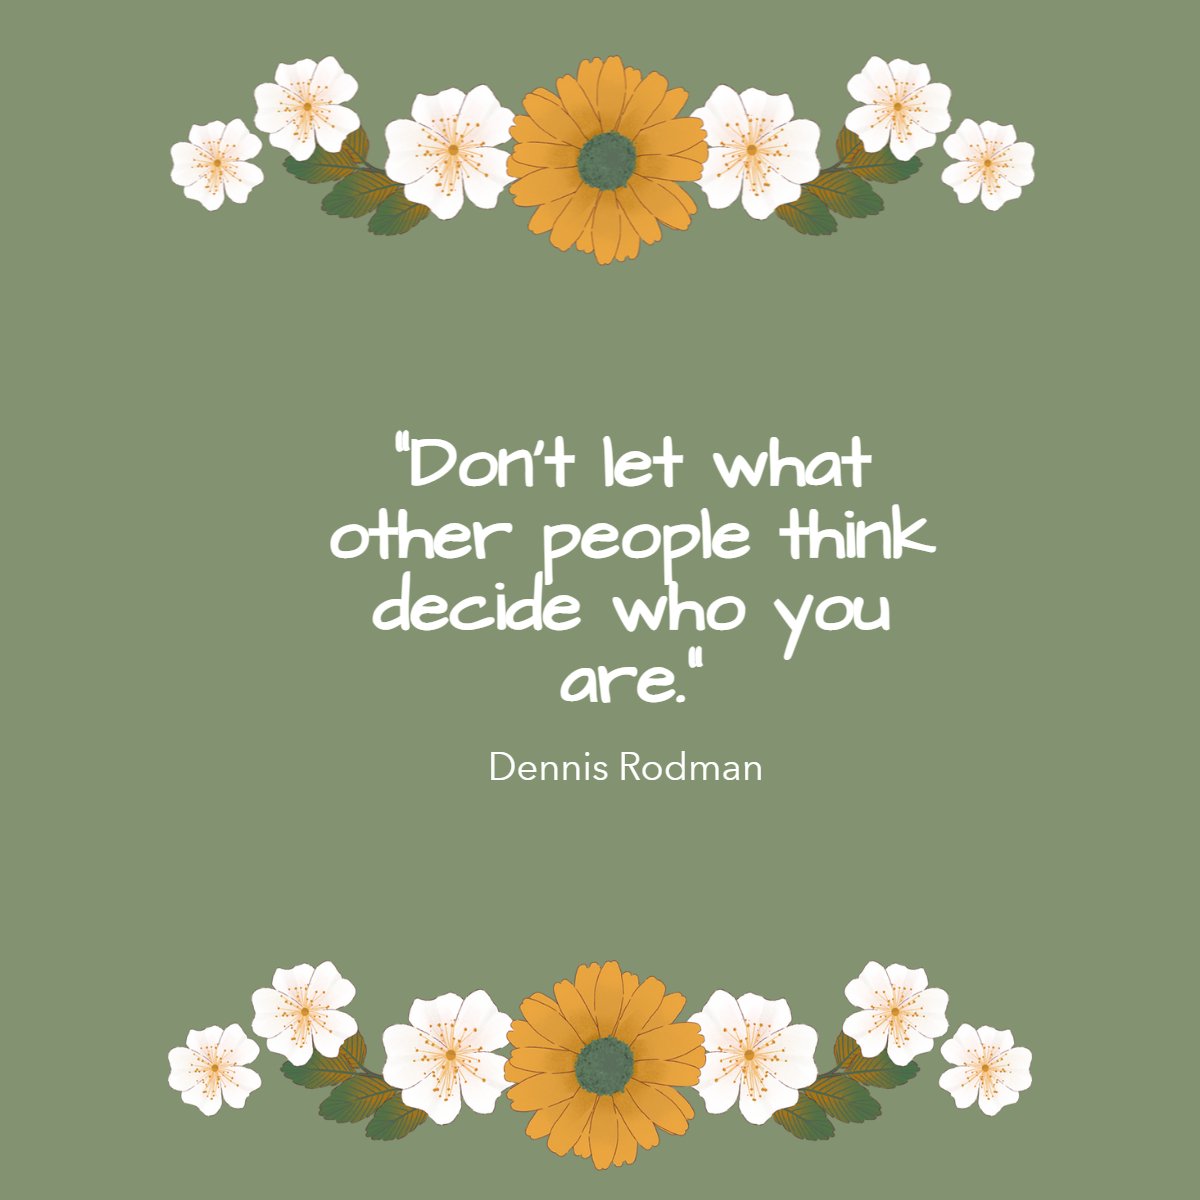 “Don't let what other people think decide who you are.”
— Dennis Rodman

#Motivation #DennisRodman #quoteoftheday✏️ #quotestagram
 #hotharfordhomesforsale #findyourdreamhomenow #marylanddreamhomes #realestategoals #sellyourhomewithme #lovewhereyoulive